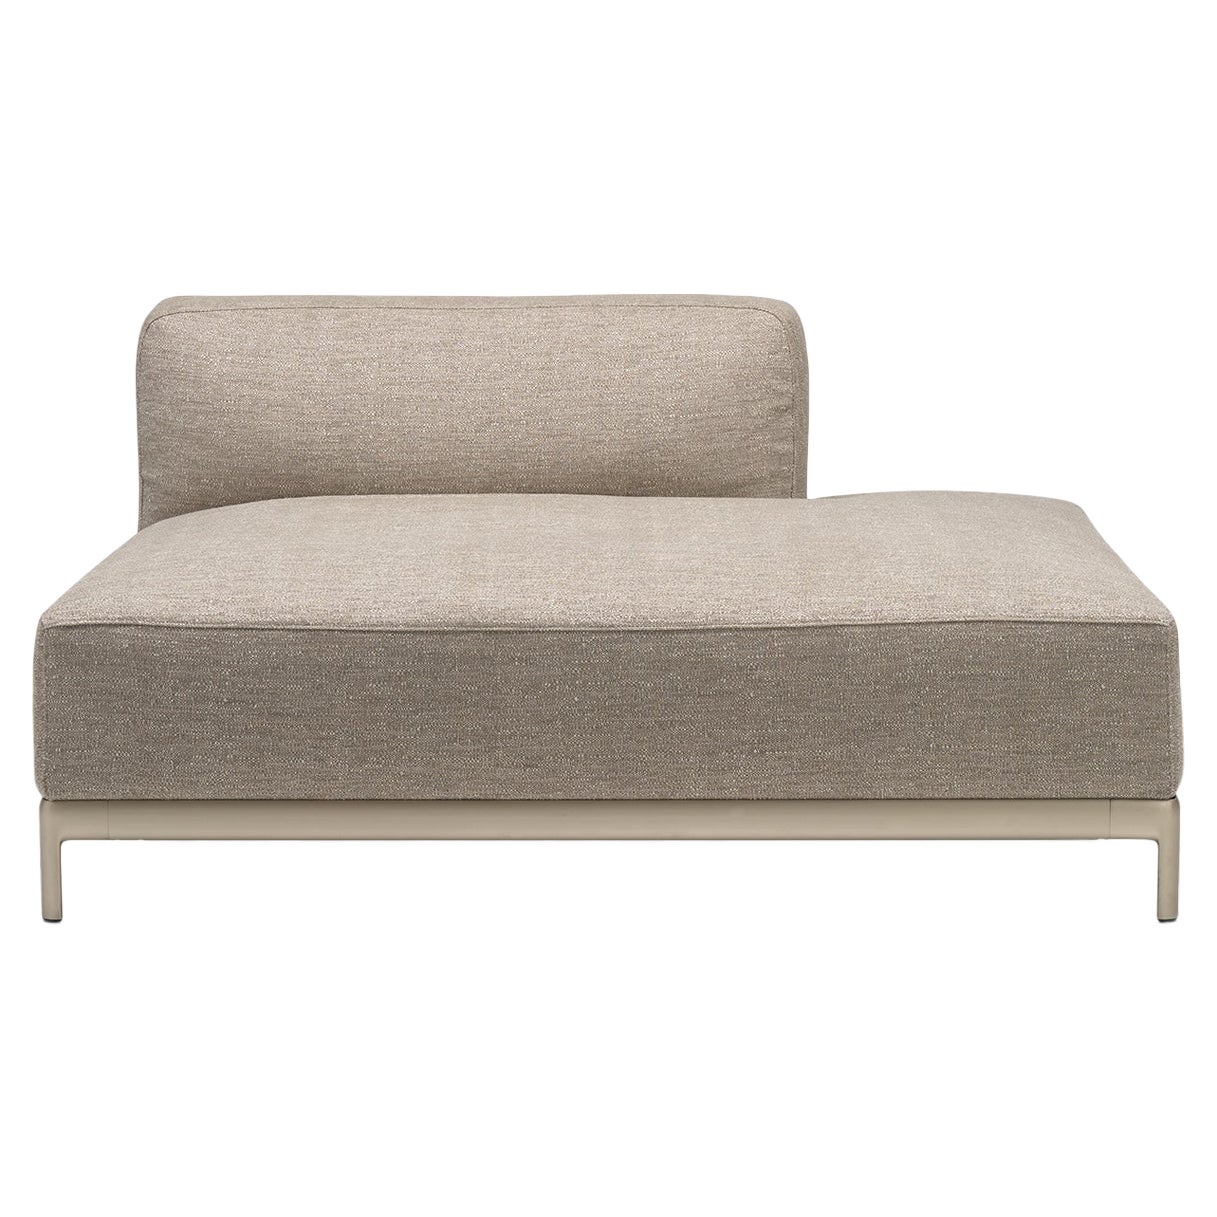 Alias P45 AluZen Soft Ending Sofa in Brown Upholstery & Anodized Gold Frame For Sale